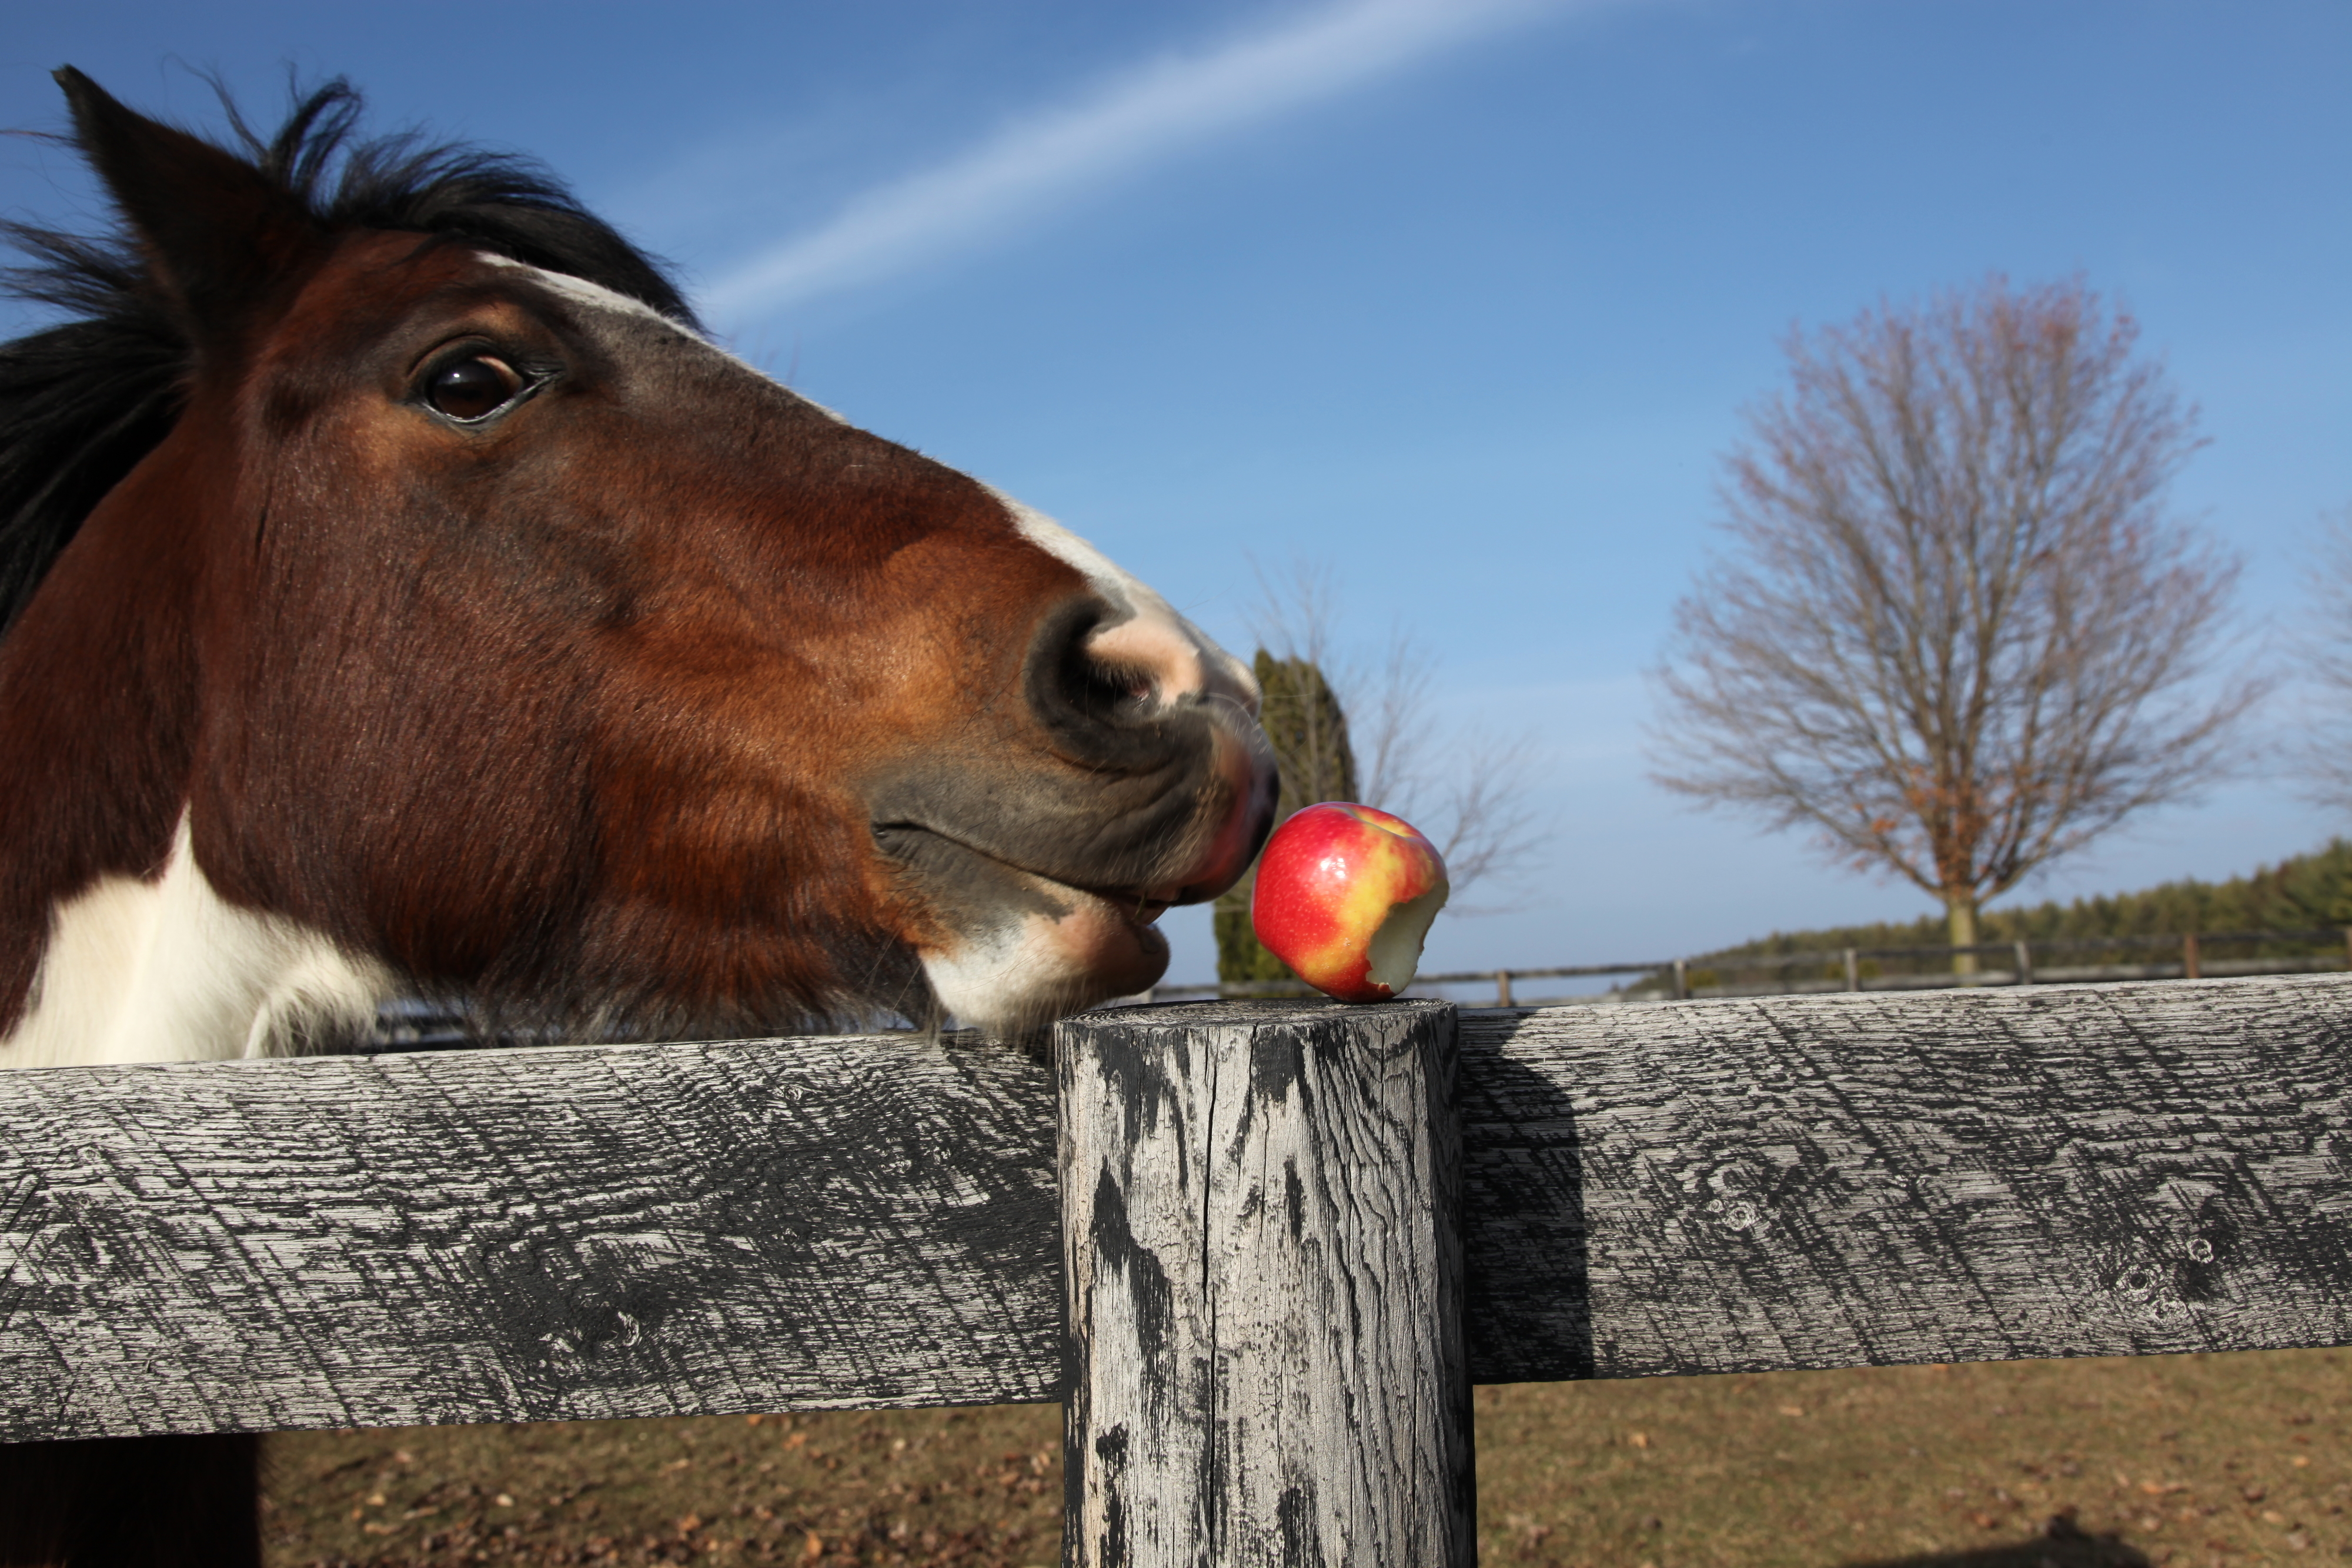 A pinto pony is tempted by an apple, set on a fencepost on a bright sunny day